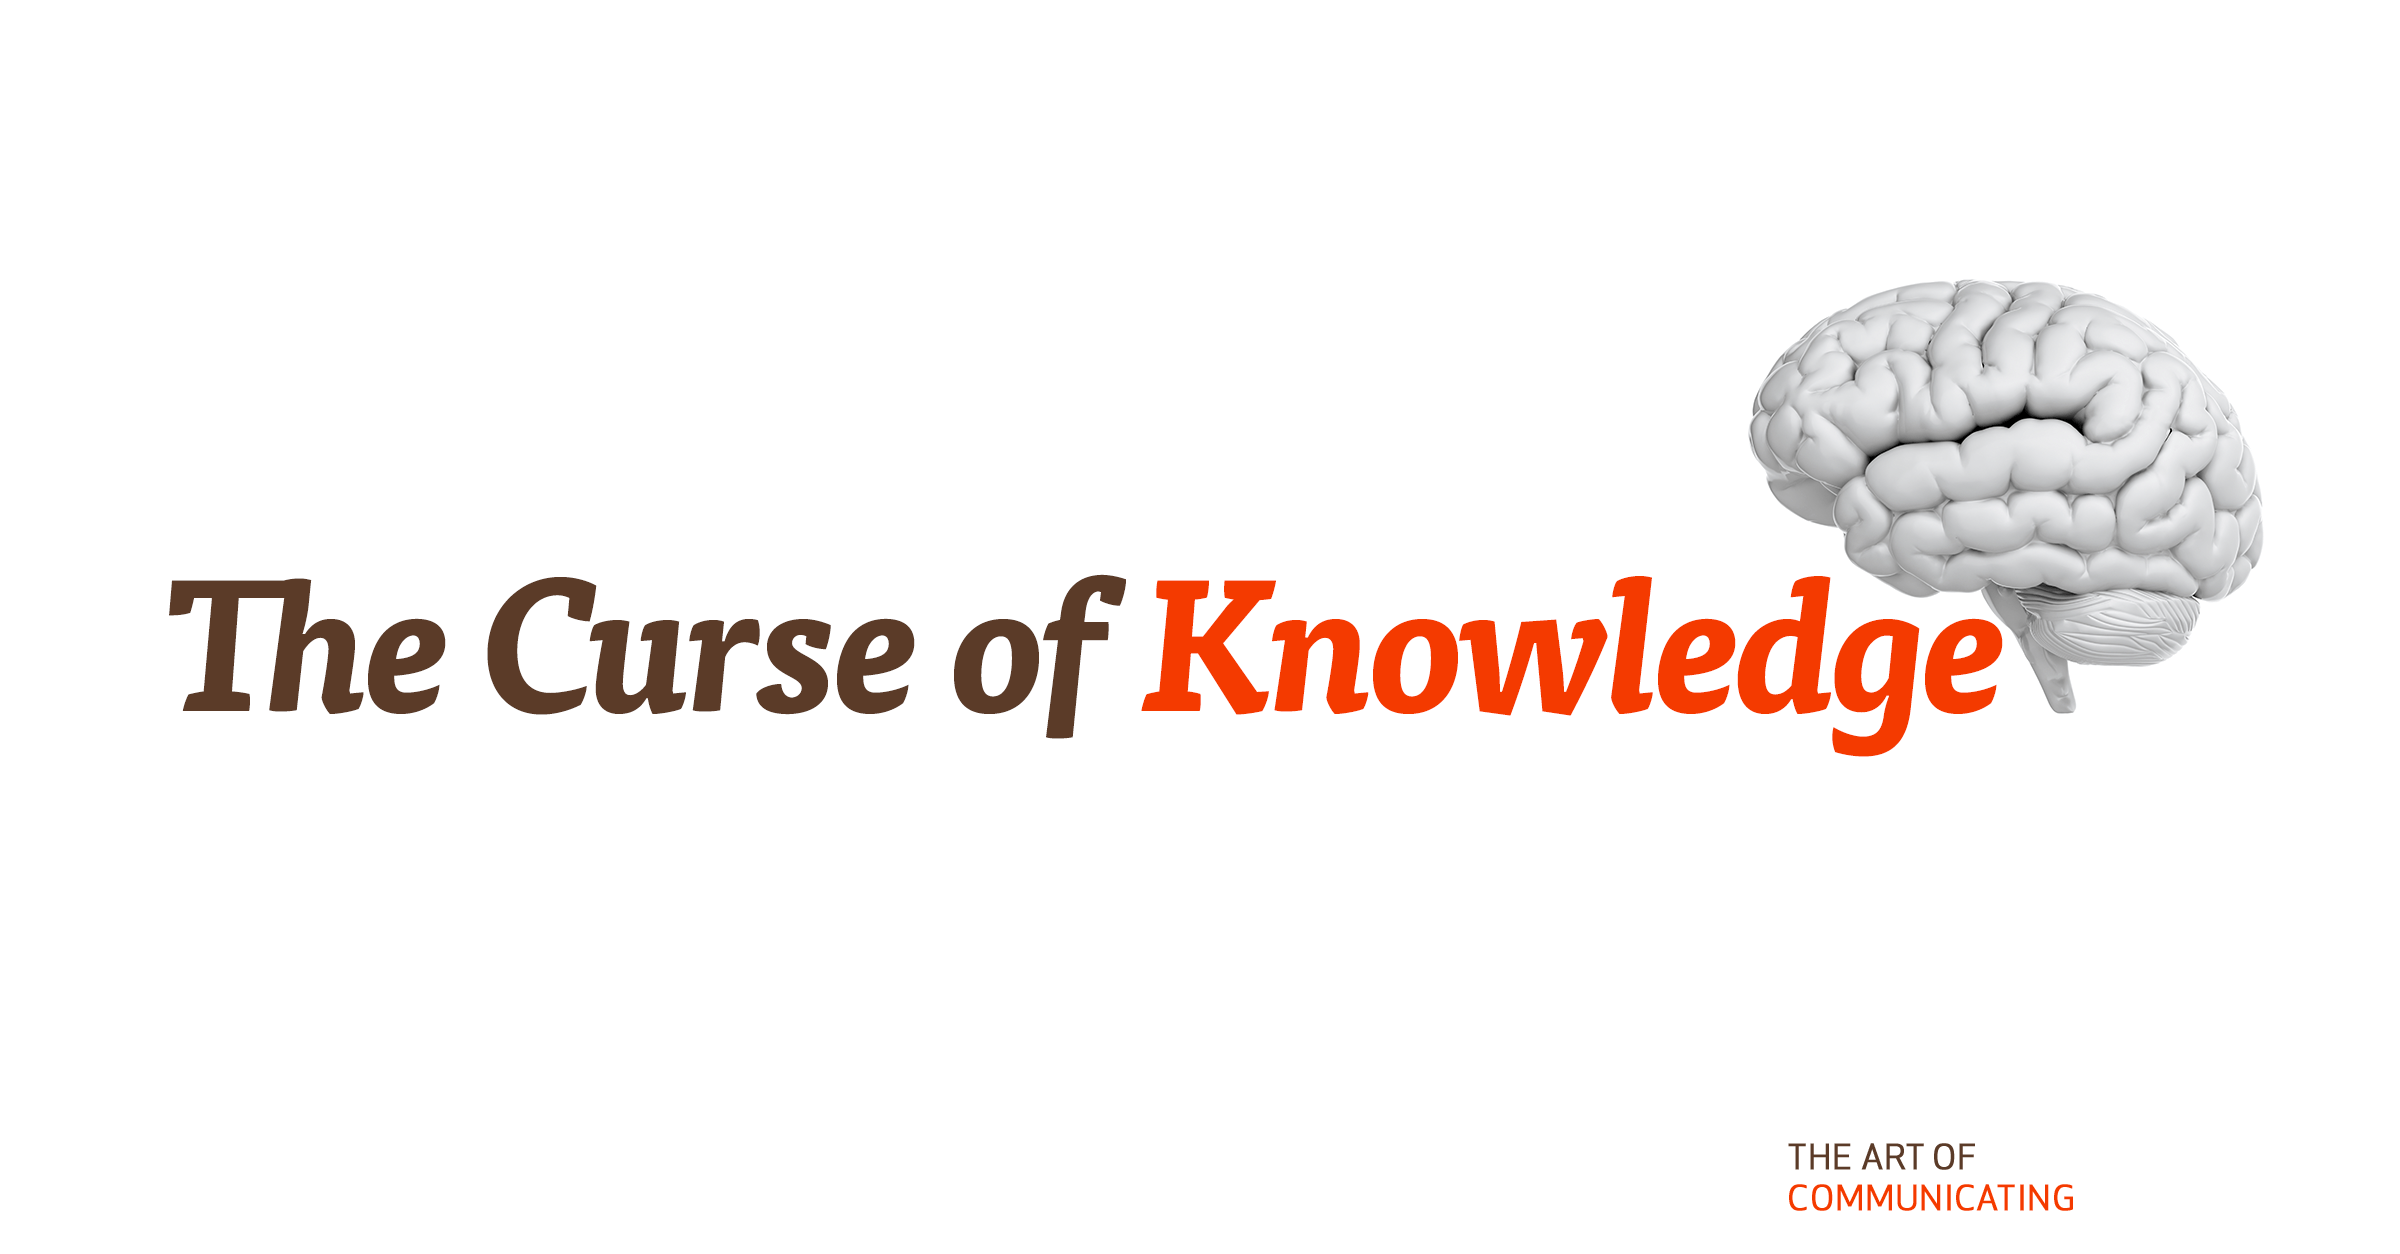 The Curse of Knowledge - The Art of Communicating